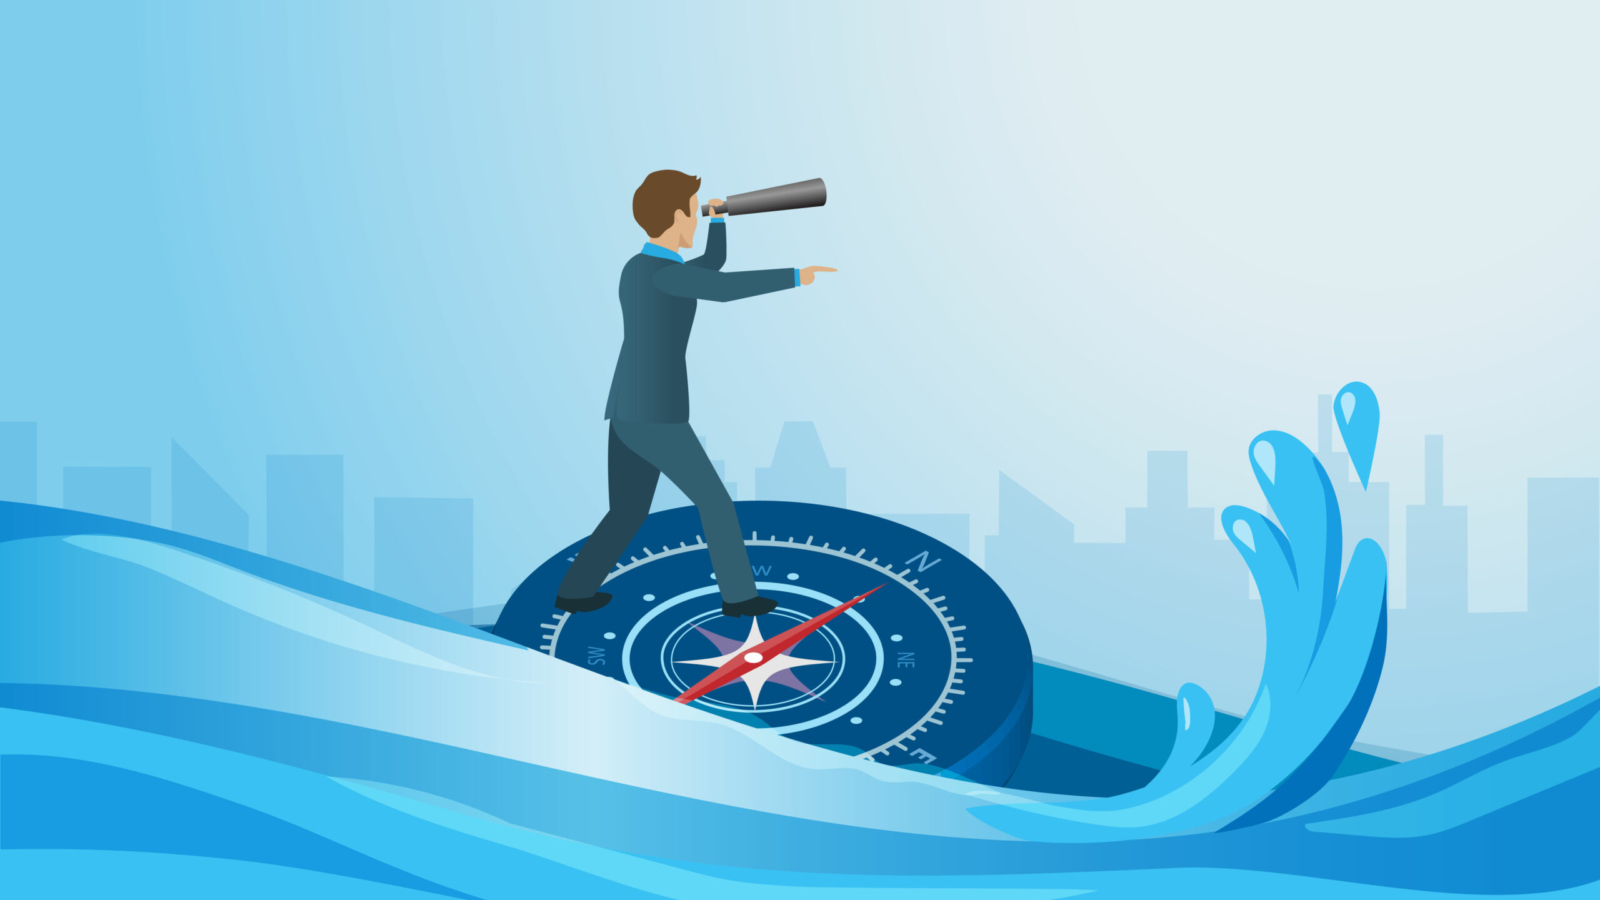 Businessman hold binocular sailing on navigation compass find way for business survive on storming ocean. Business vision and management problem solving from global economic crisis.